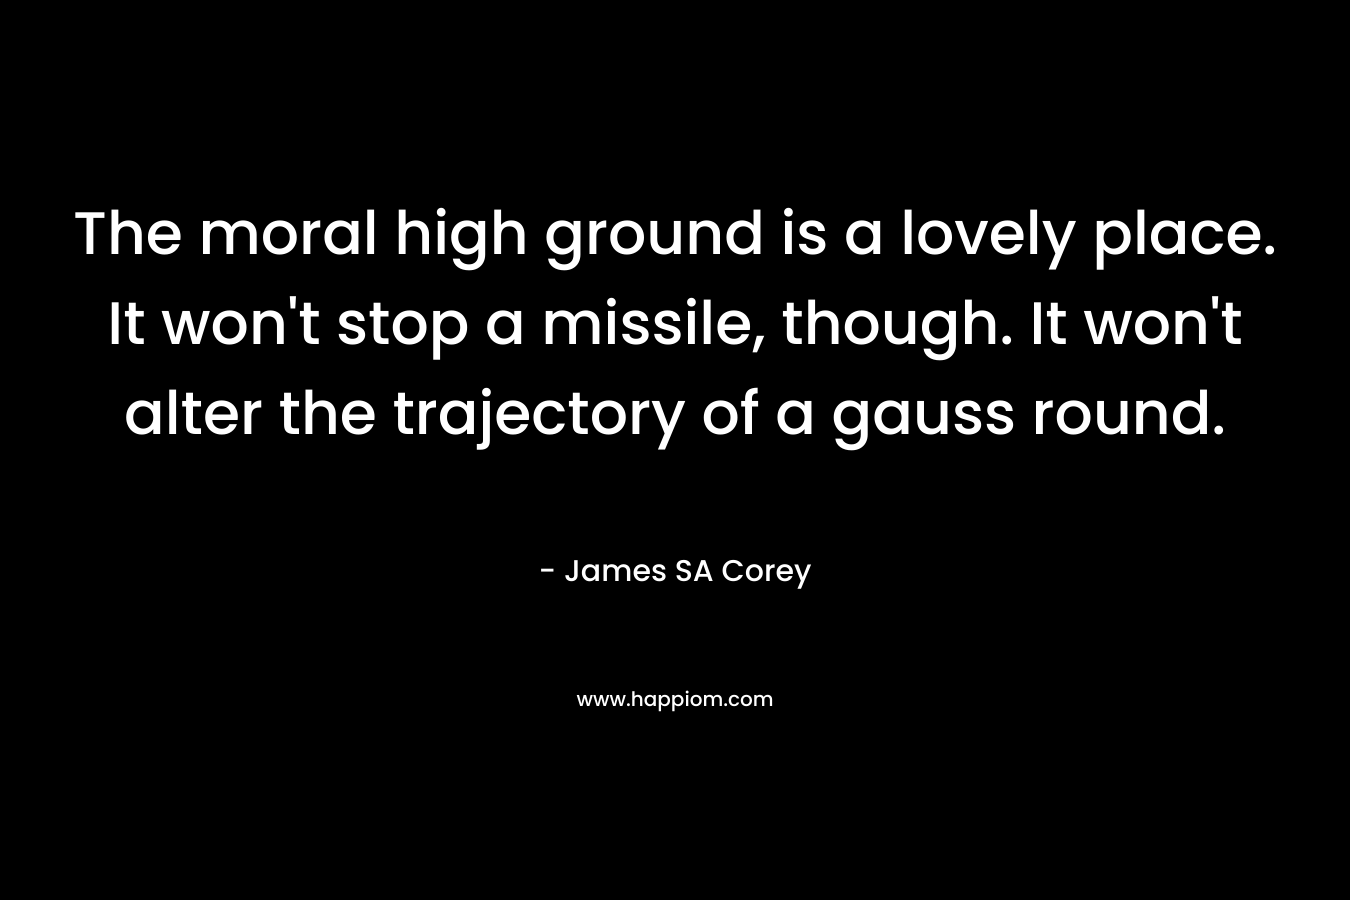 The moral high ground is a lovely place. It won’t stop a missile, though. It won’t alter the trajectory of a gauss round. – James SA Corey